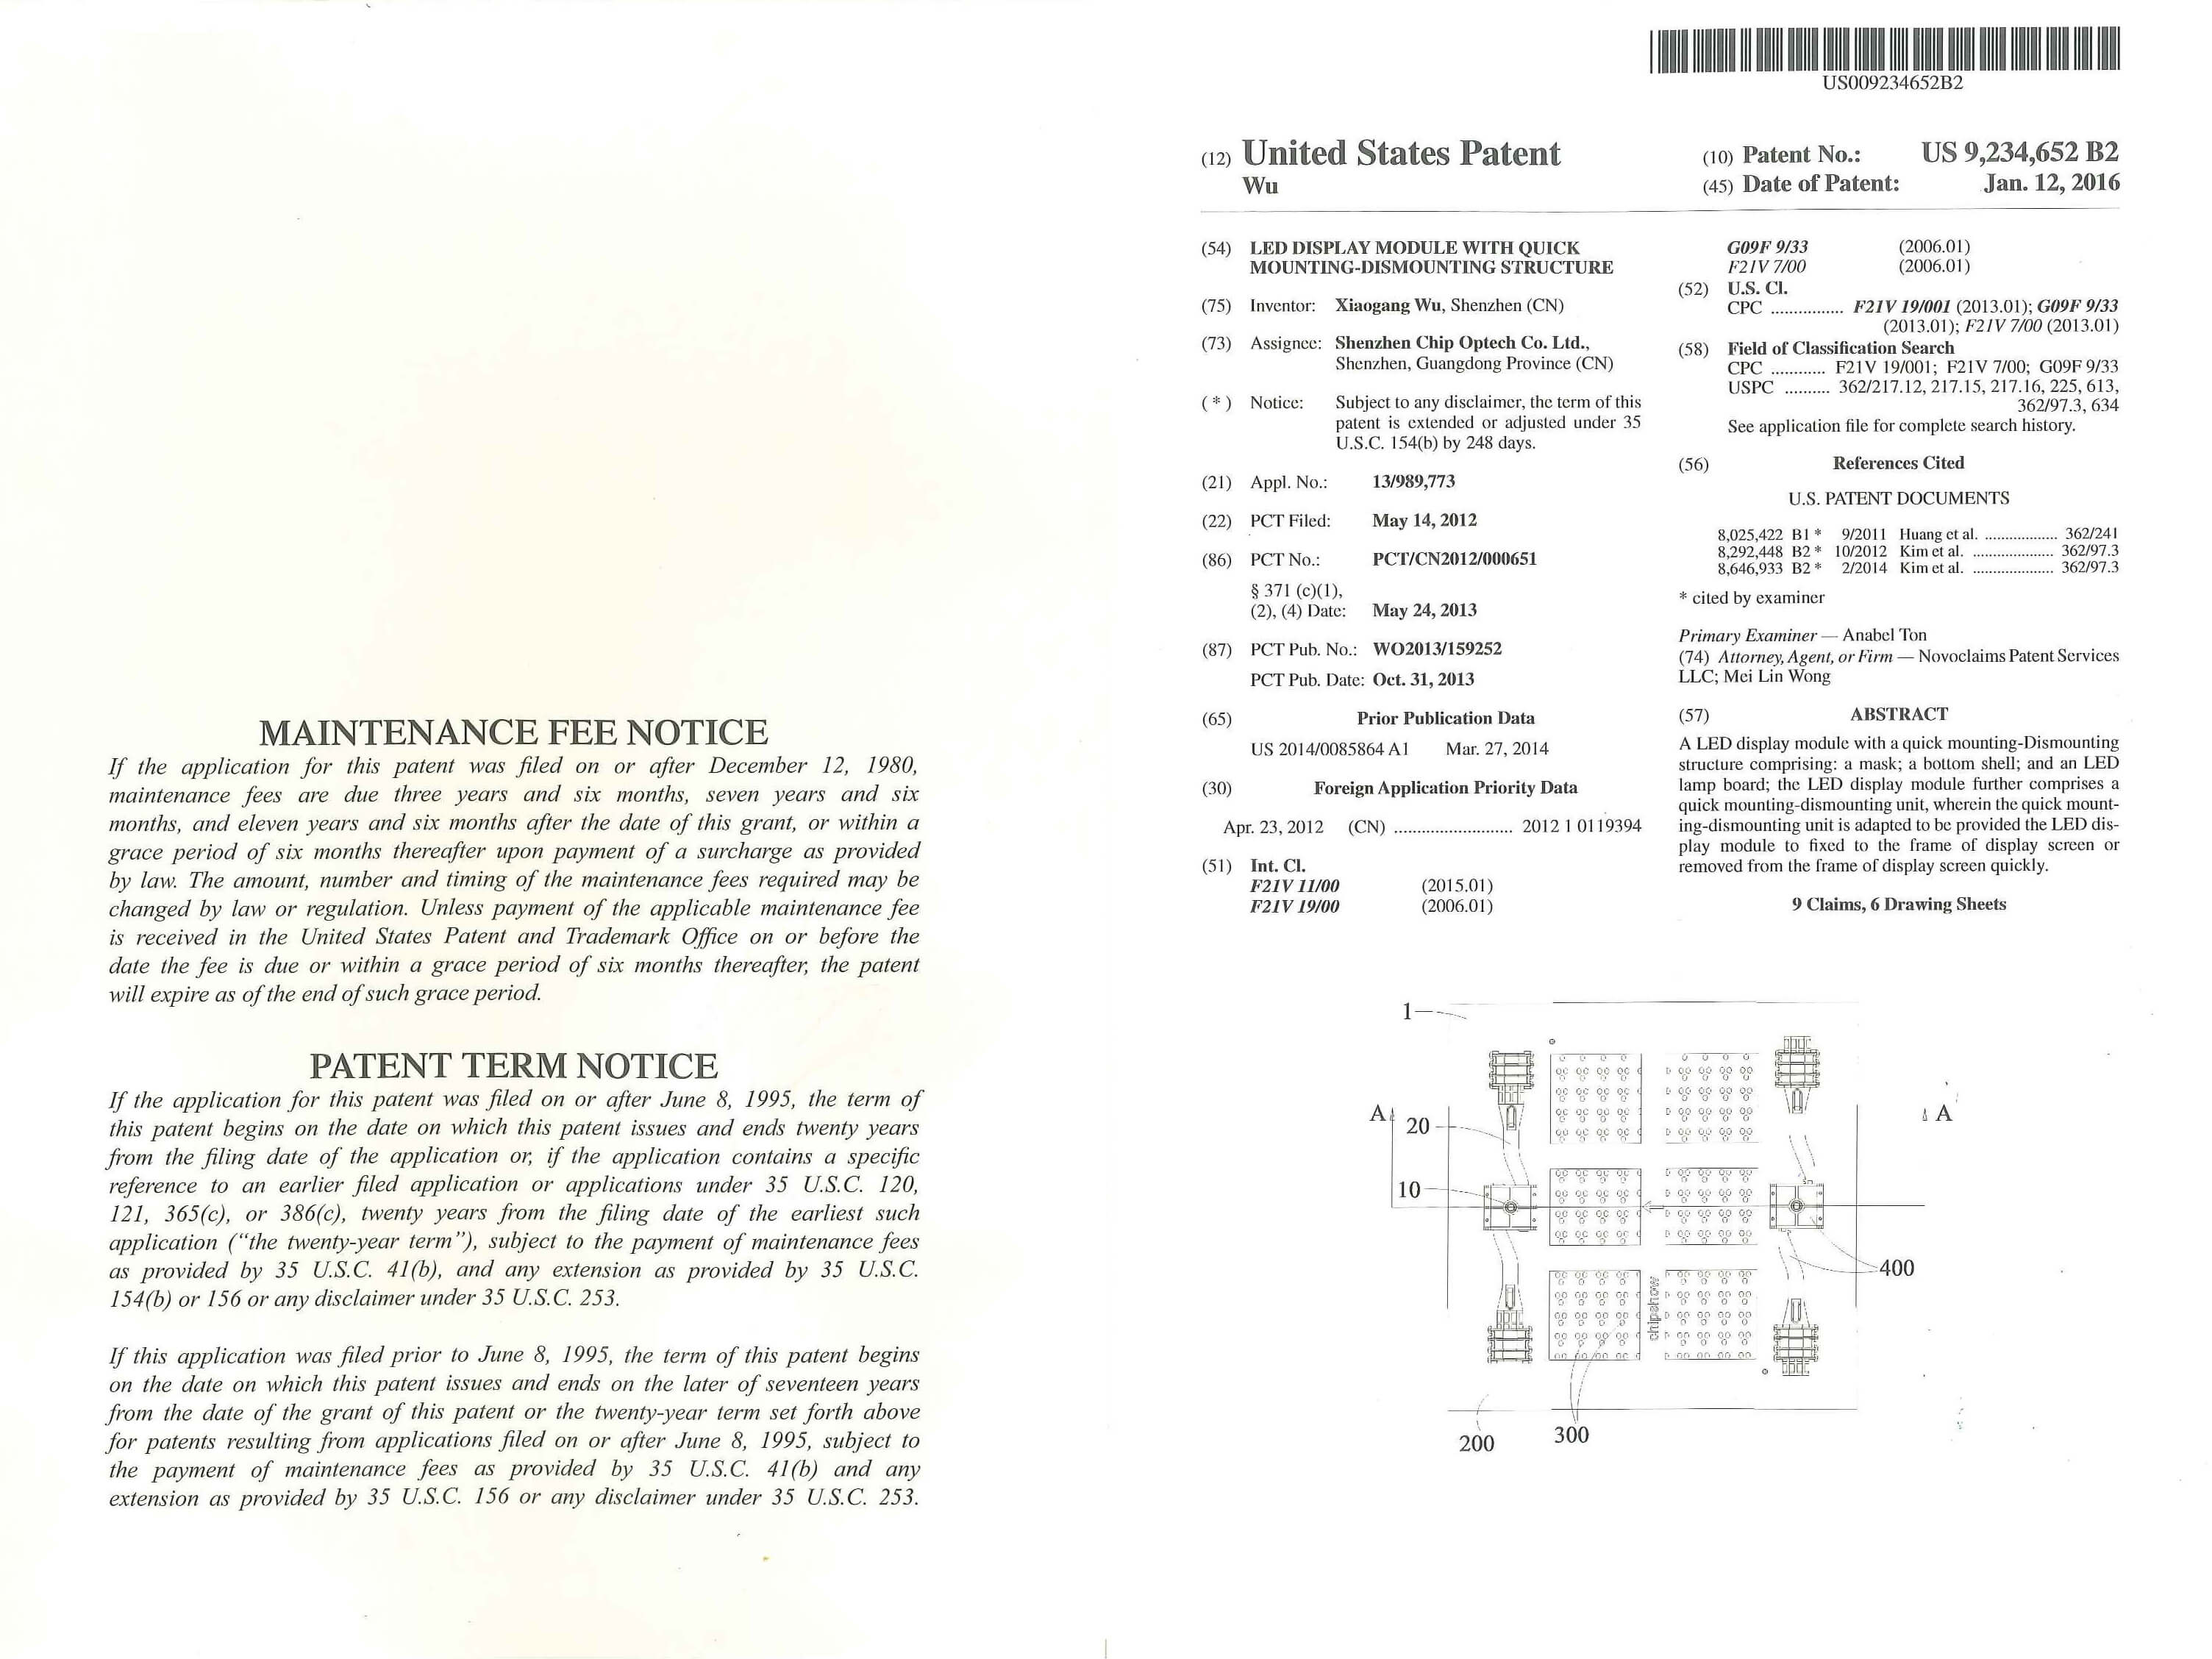 United States Patent (LED display module with quick mounting-dismounting structure)